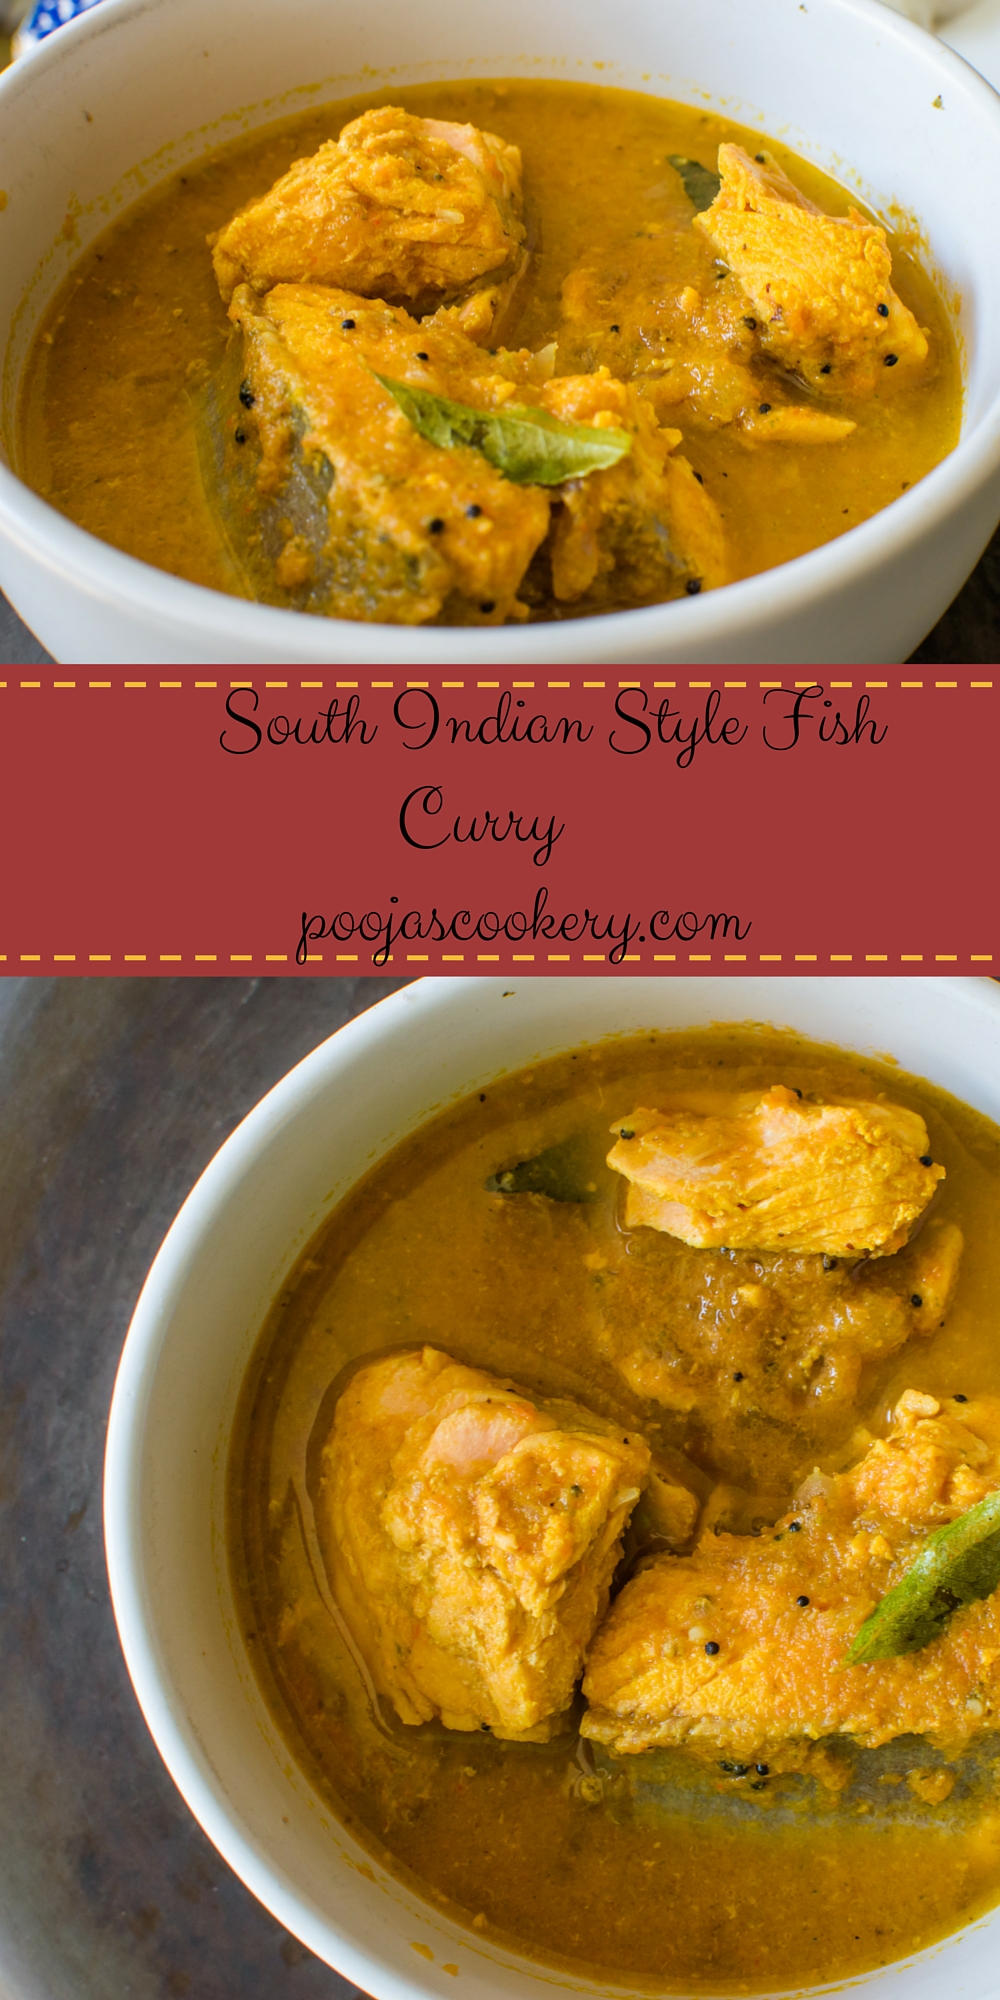 South Indian Style Fish Curry Recipe - Pooja's Cookery